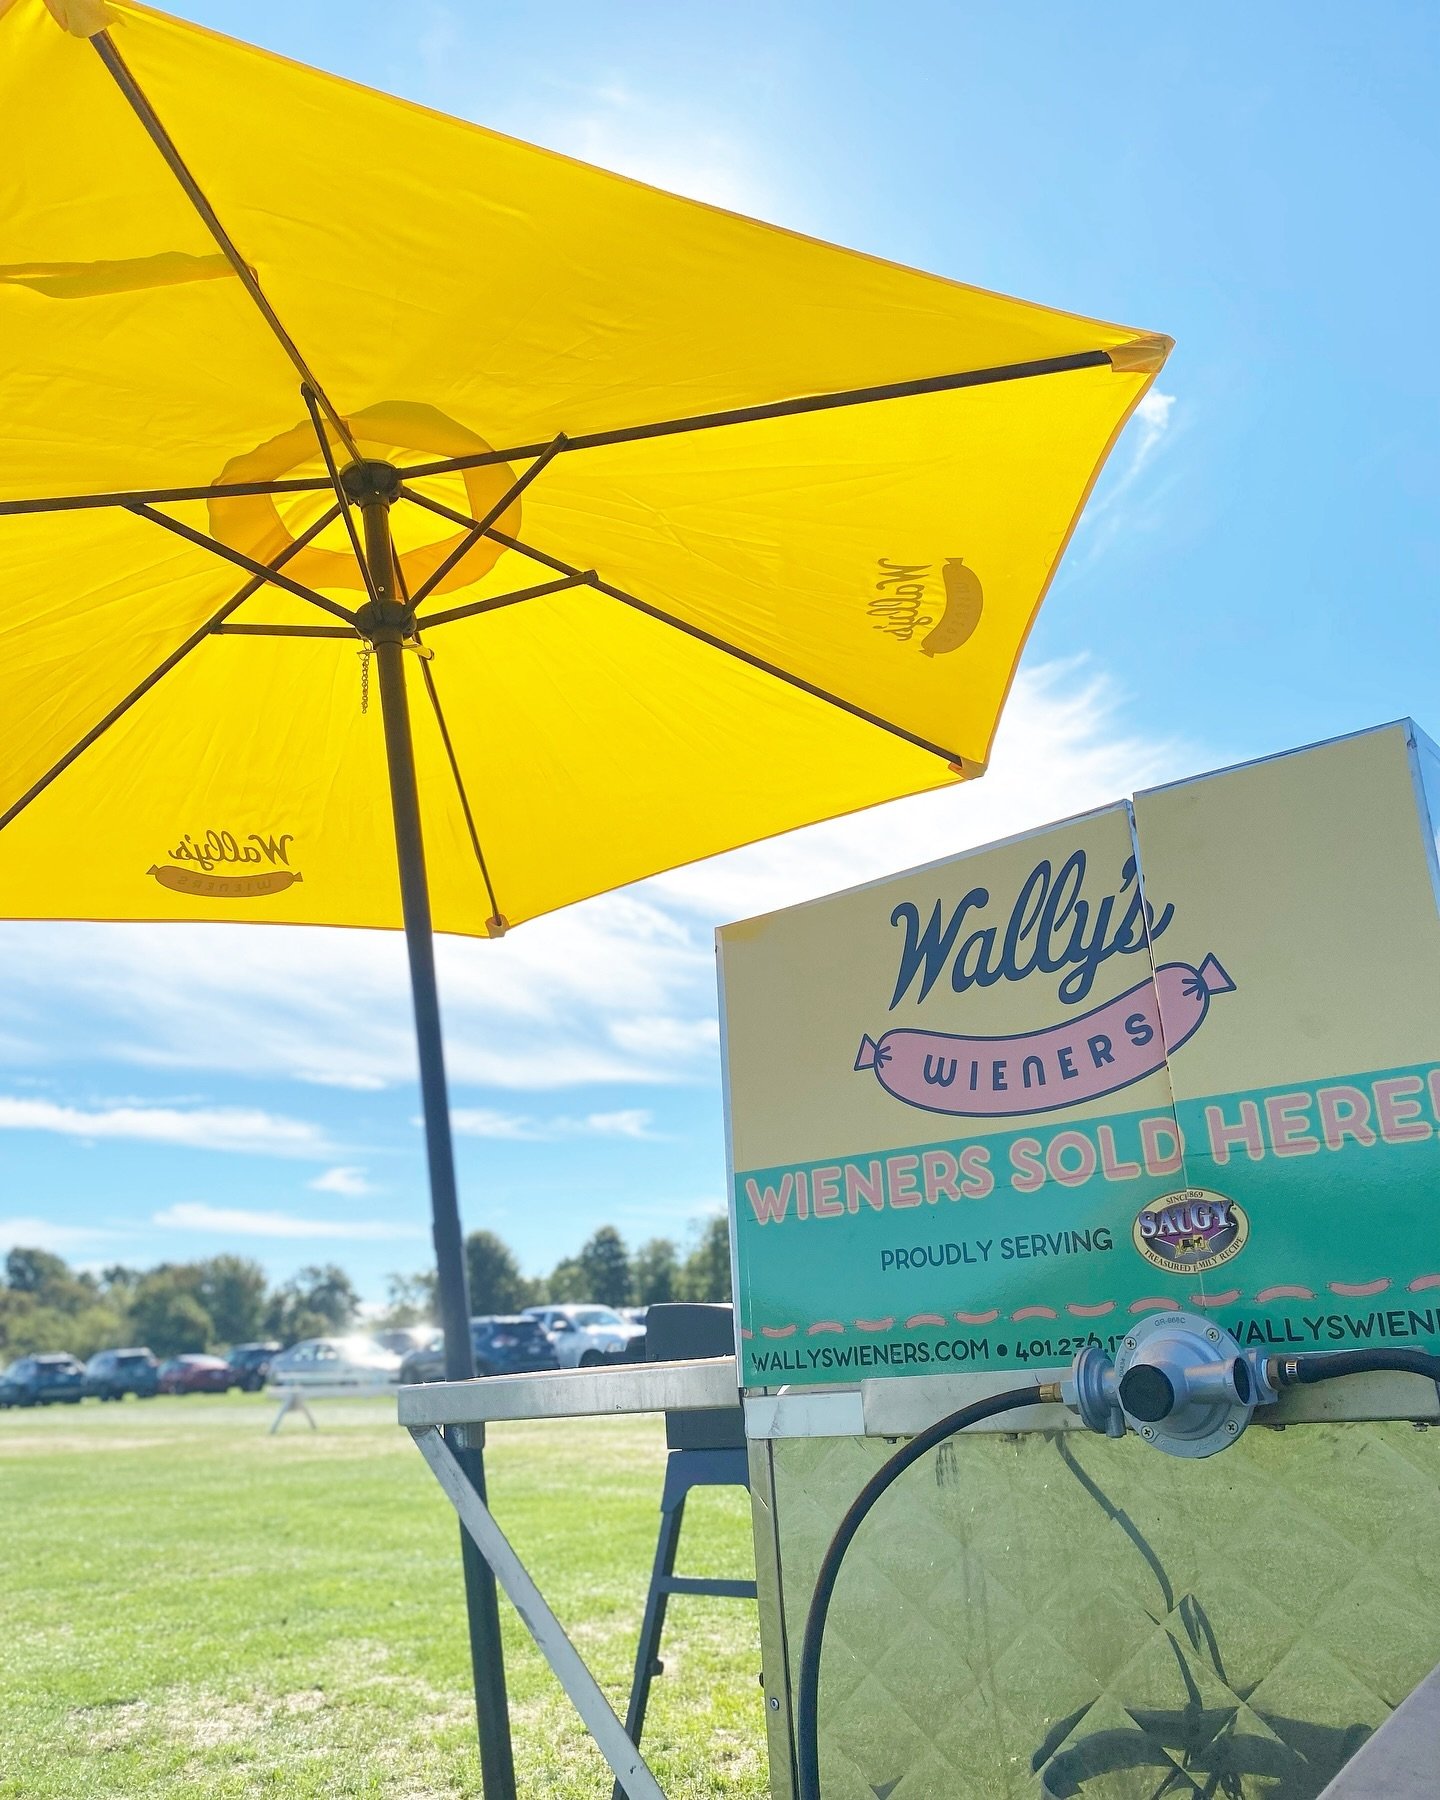 Cart season is here 🥳🌭 and get ready because if you&rsquo;re heading to the beach, the hot dog cart will be there EVERY. DAY. 🌊☀️ 
.
Starting this Wednesday, 5/15, find the cart at Easton&rsquo;s (First) beach every day for the whole summer! 😎
.
